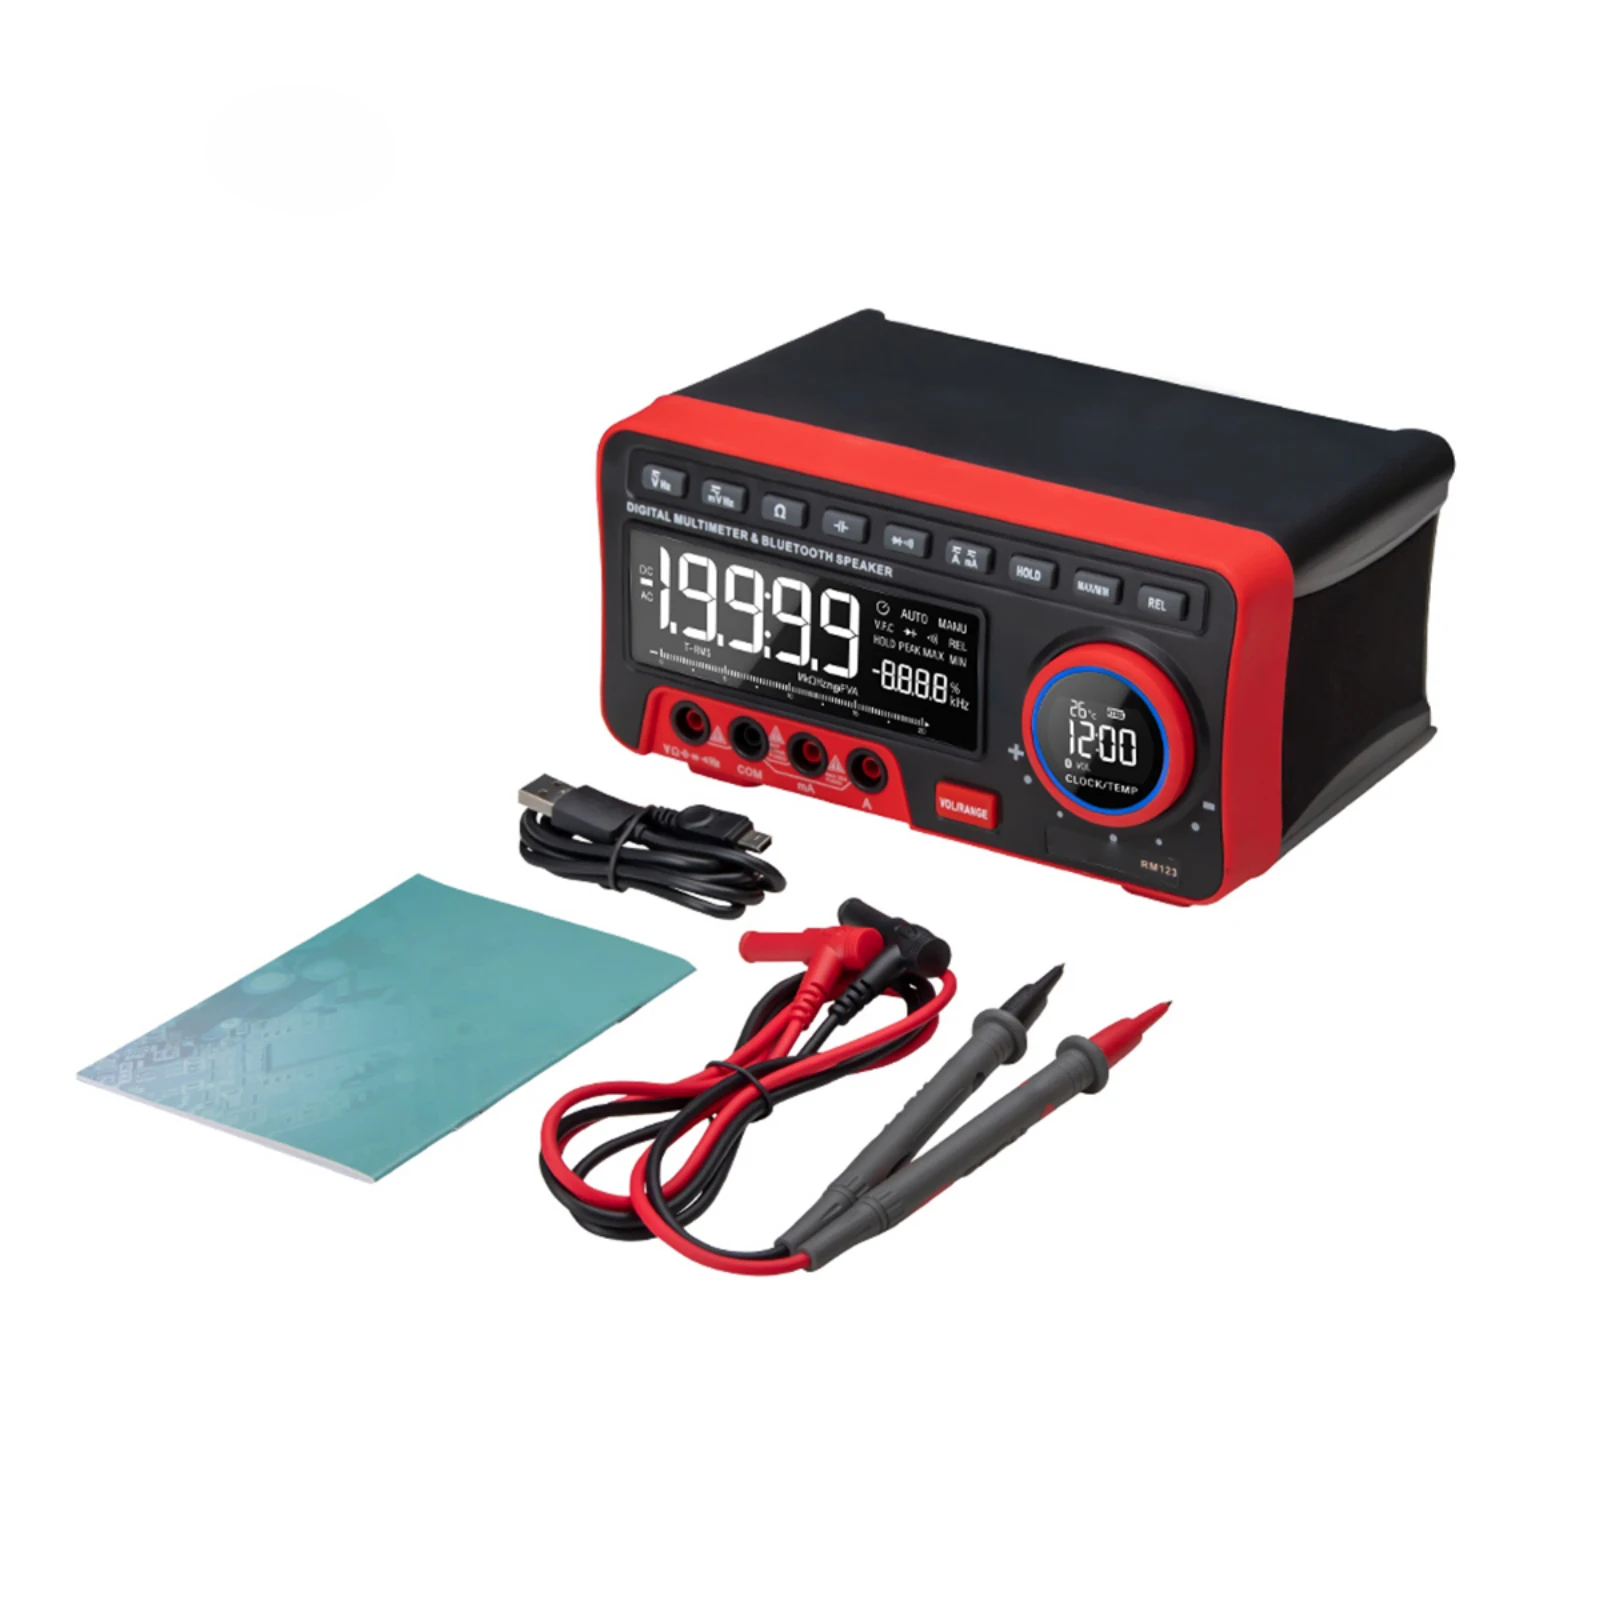 

AN888S LCD Display Bench Type Digital Multimeters Volt Amp Ohm Capacitance Hz 19999 Counts Automatic Range Tester High-Accuracy